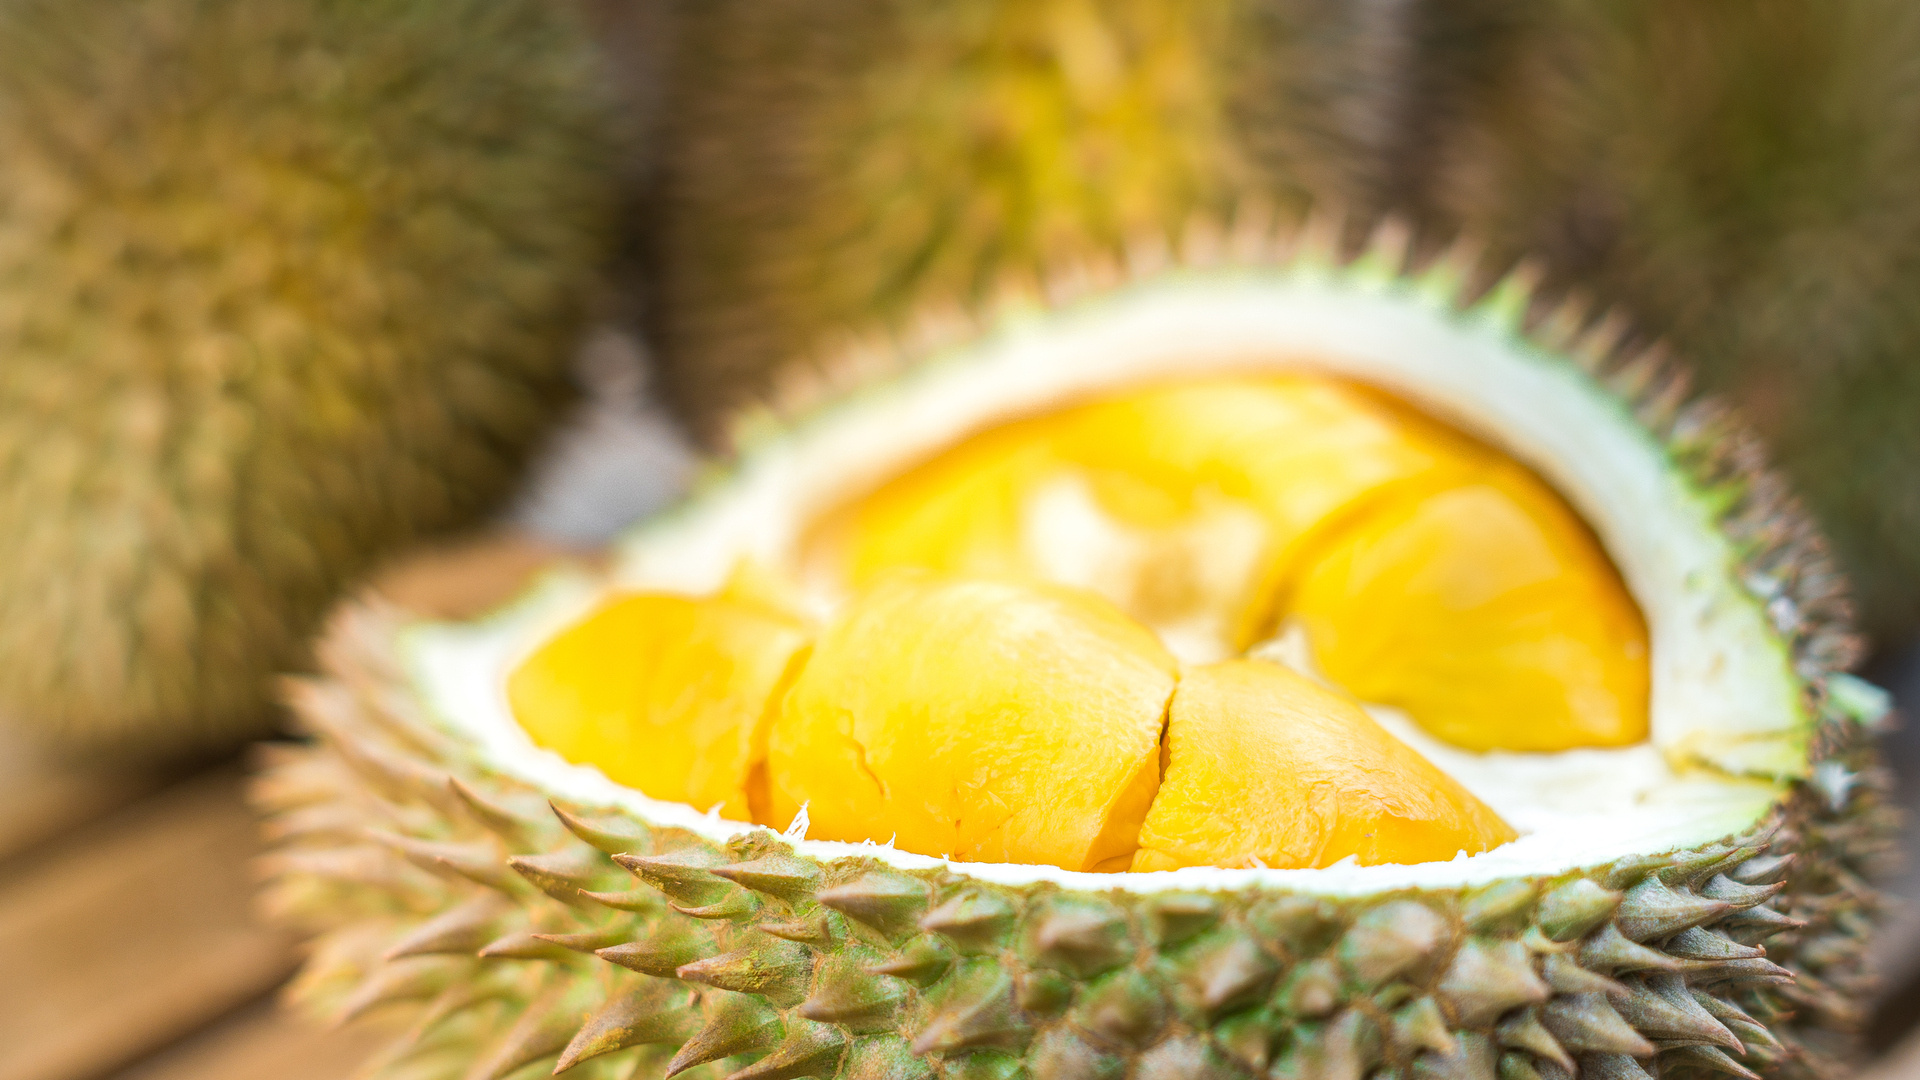 Durian: Used in traditional medicine in Asia to treat fever, jaundice, and improve digestion. 1920x1080 Full HD Background.